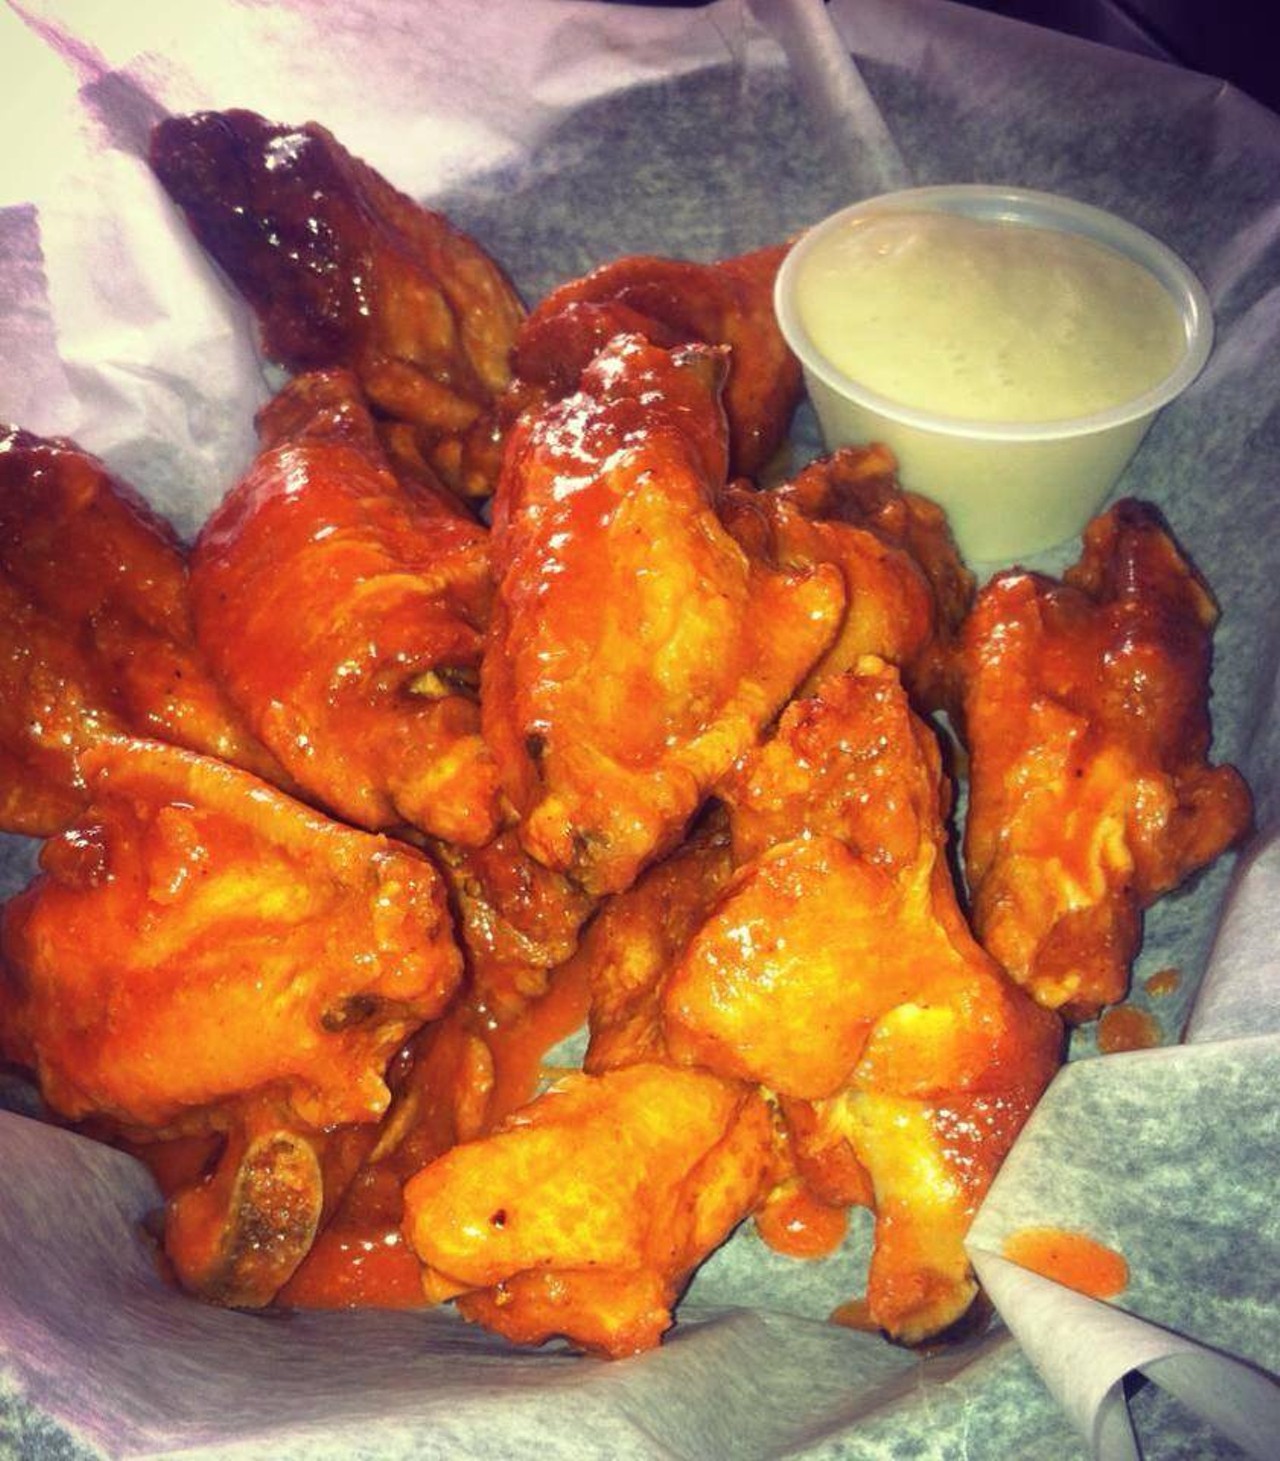 Skinny's Bar & Grill (Euclid)
Considered to be one of the best wing spots in the region, Skinny's Bar & Grill in Euclid has a wing night on Monday's that shouldn't be missed. Ten giant wings tossed in their house made sauce for only $7.50.